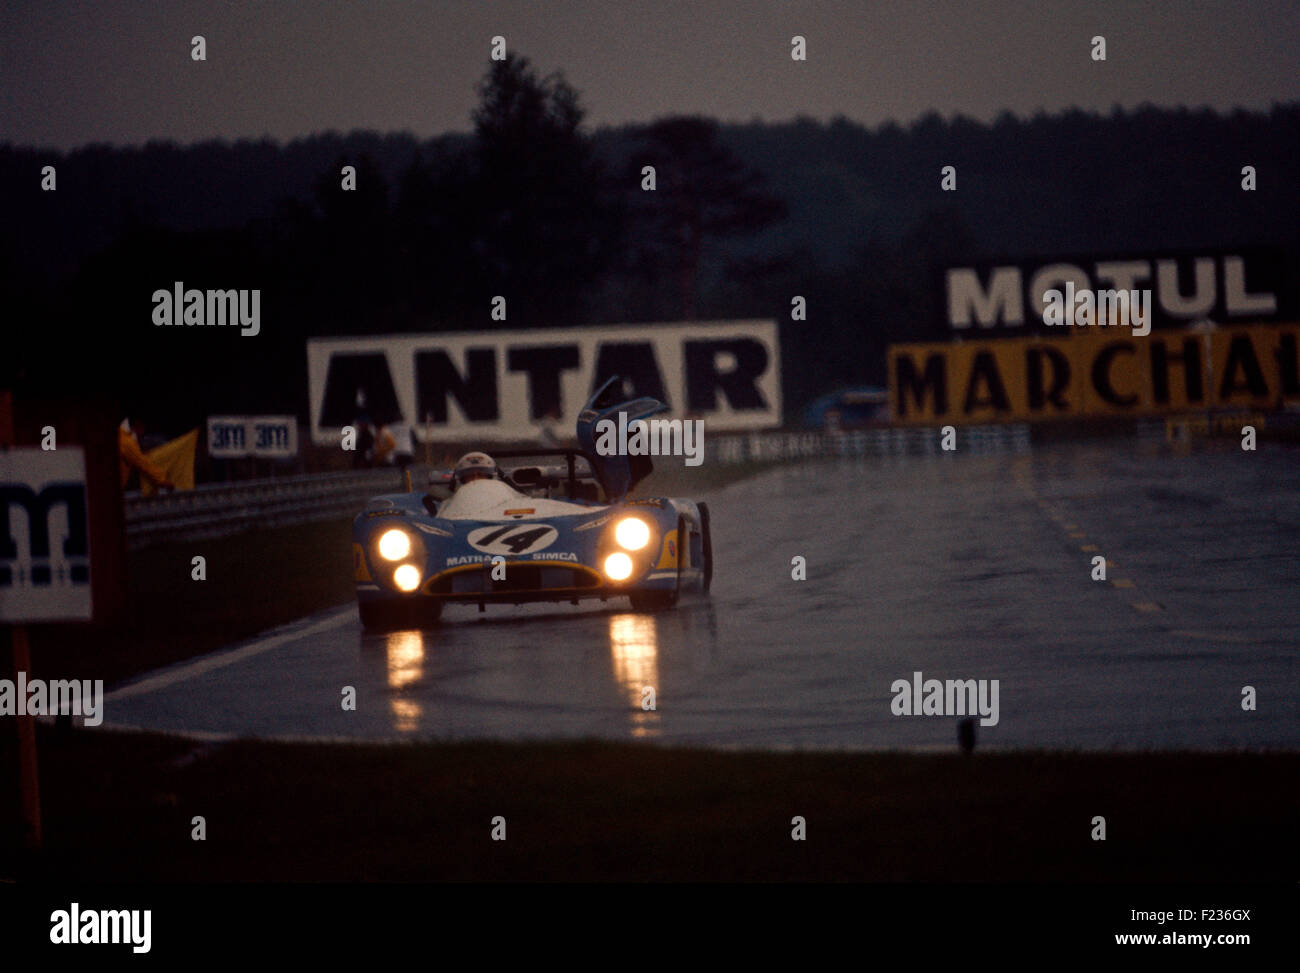 14 François Cevert and  Howden Ganley Matra Simca entering the Ford chicane, Le Mans 11 June 1972 Stock Photo